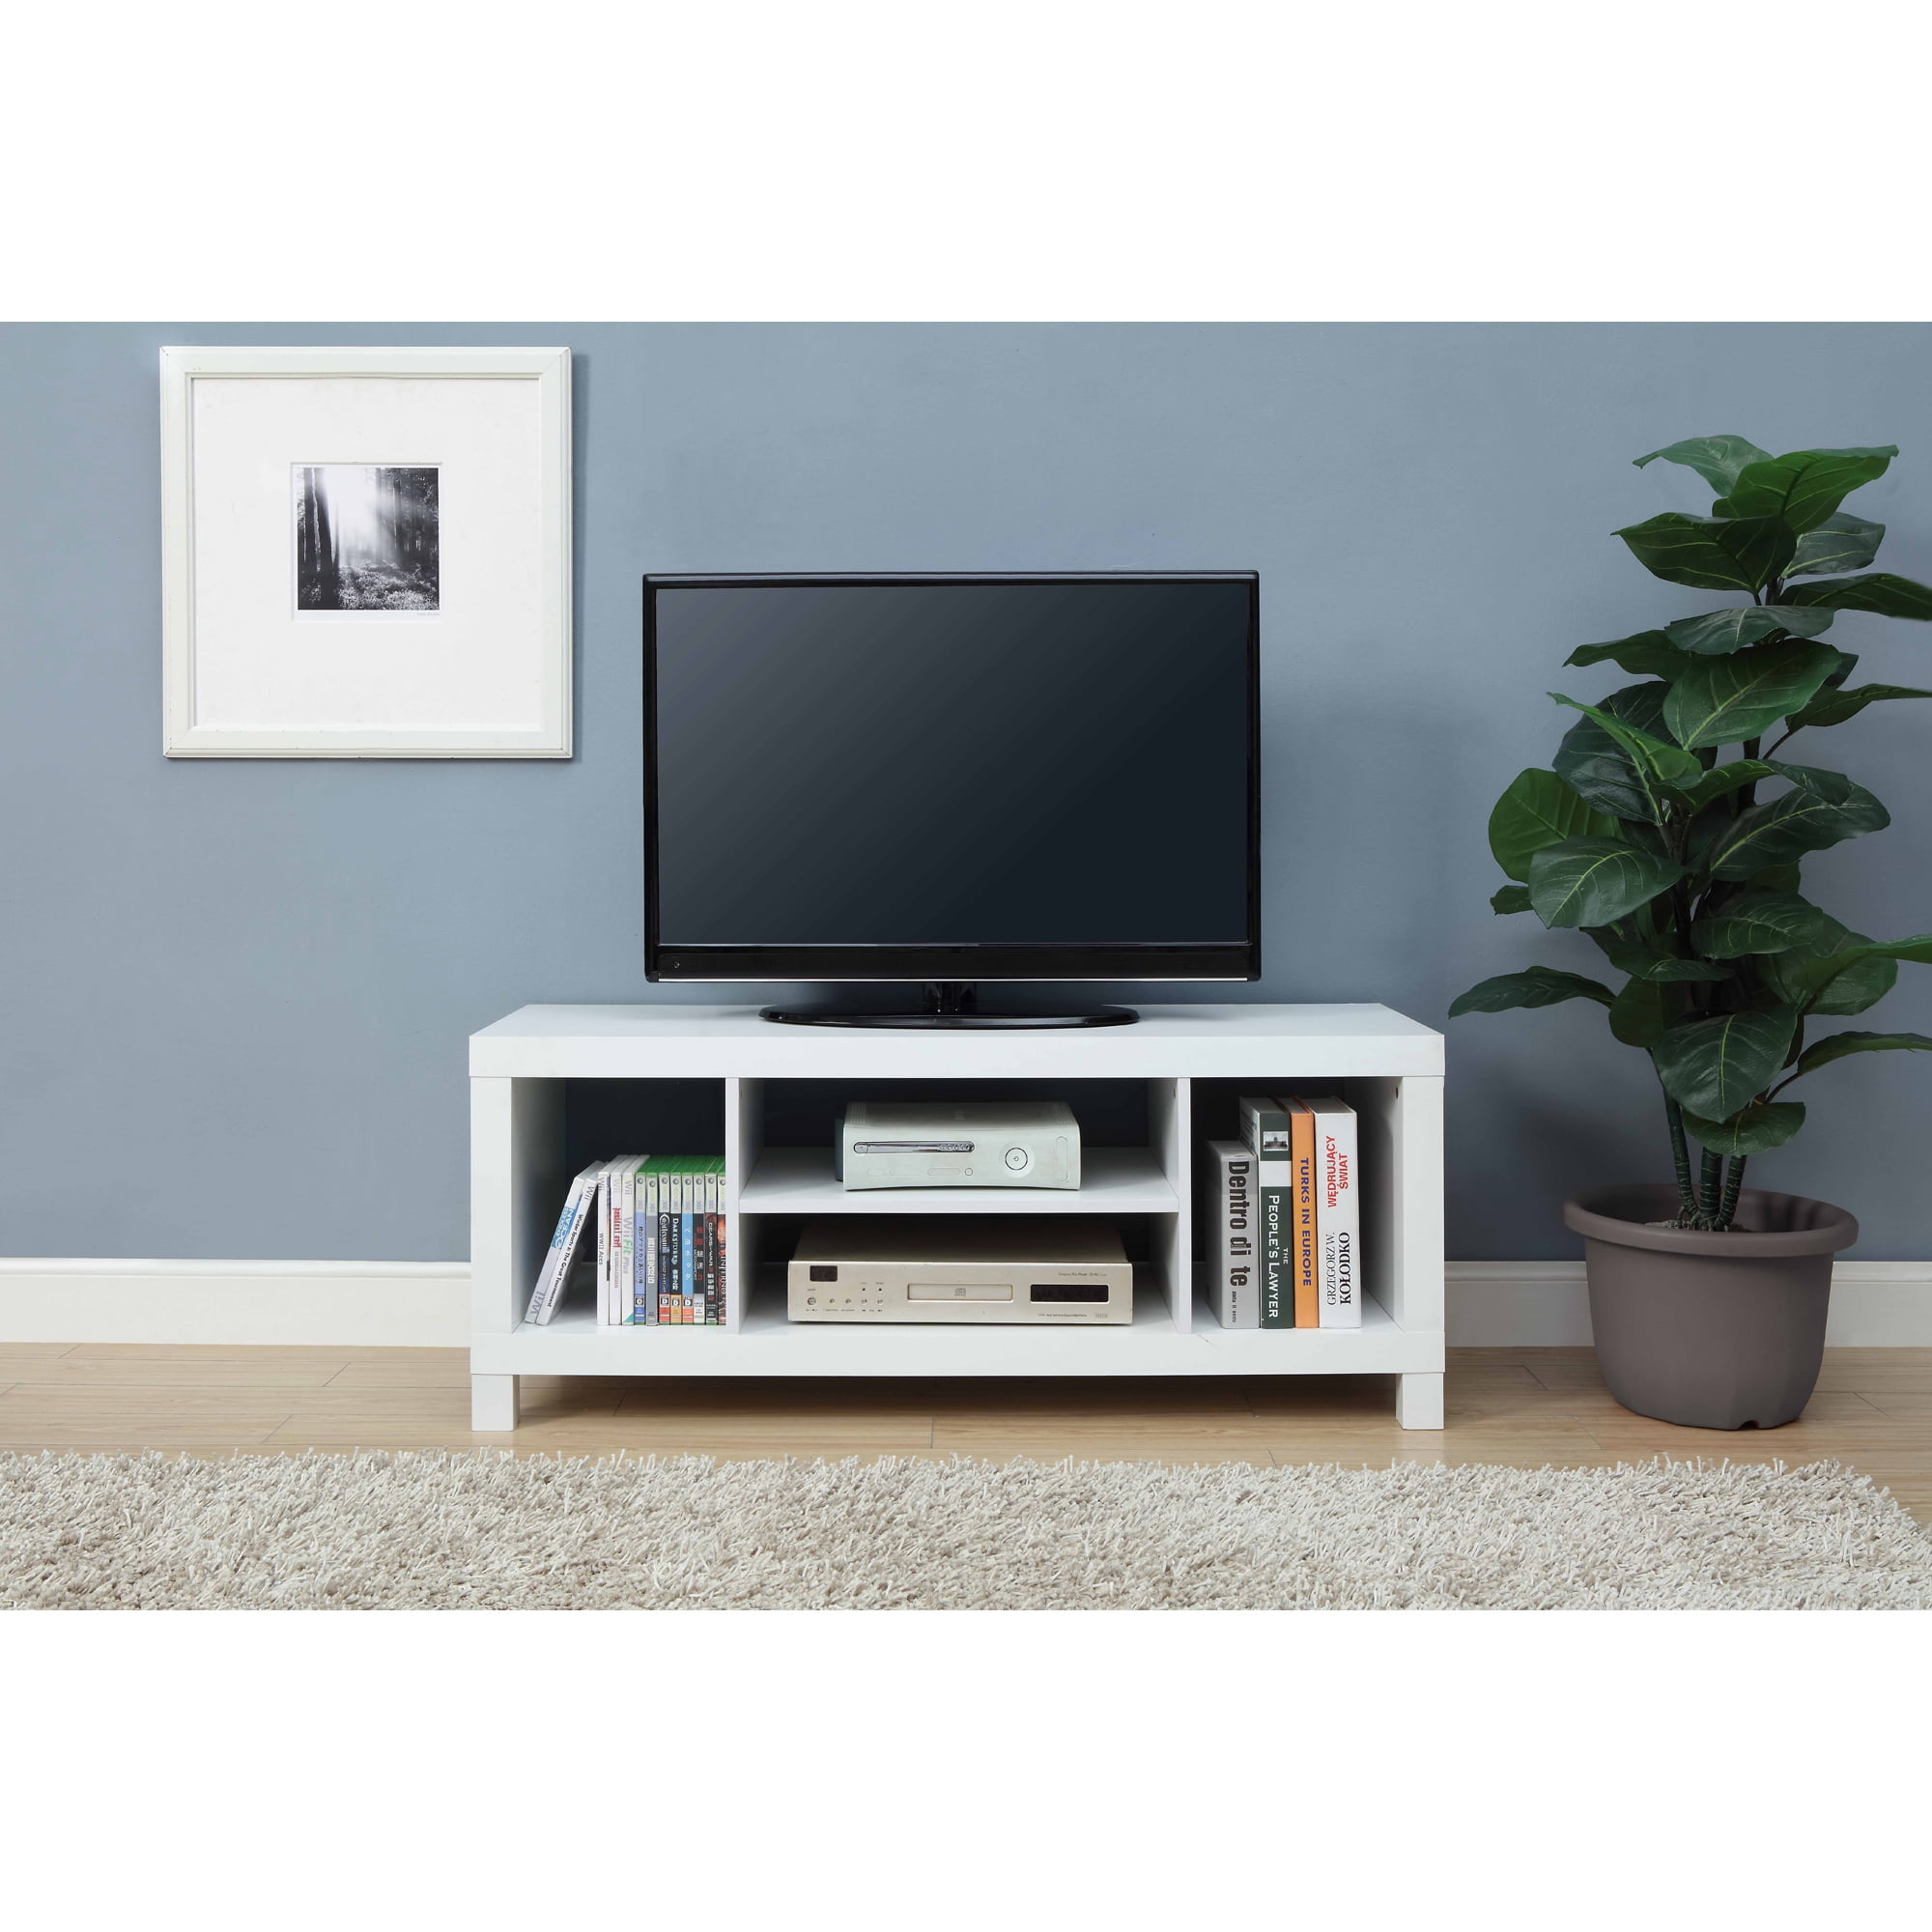 Mainstays TV Stand for TVs up to 42", Multiple Colors ...